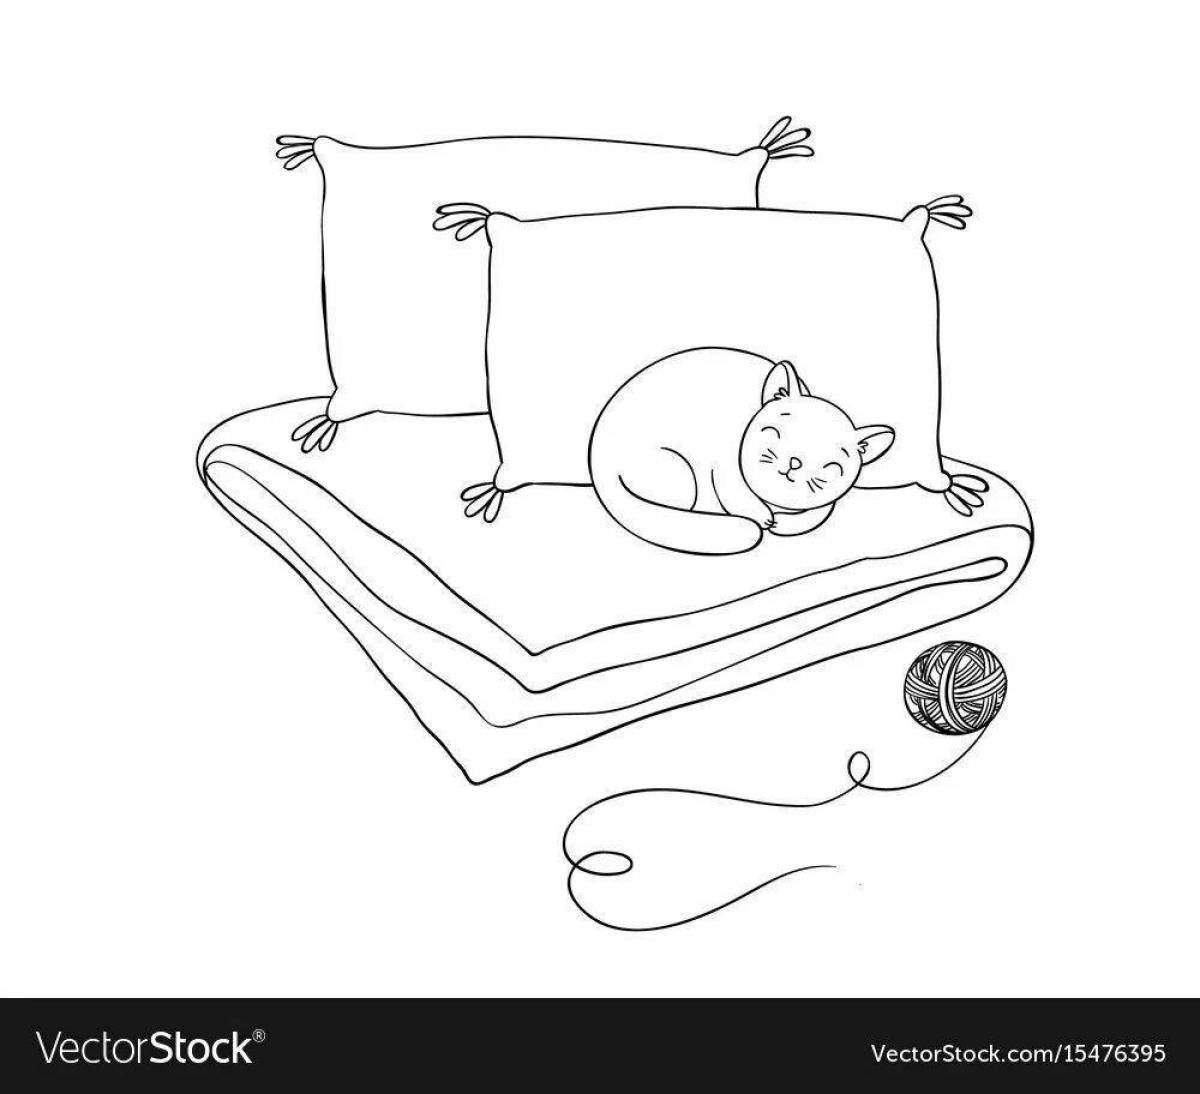 Coloring teddy bear under the blanket